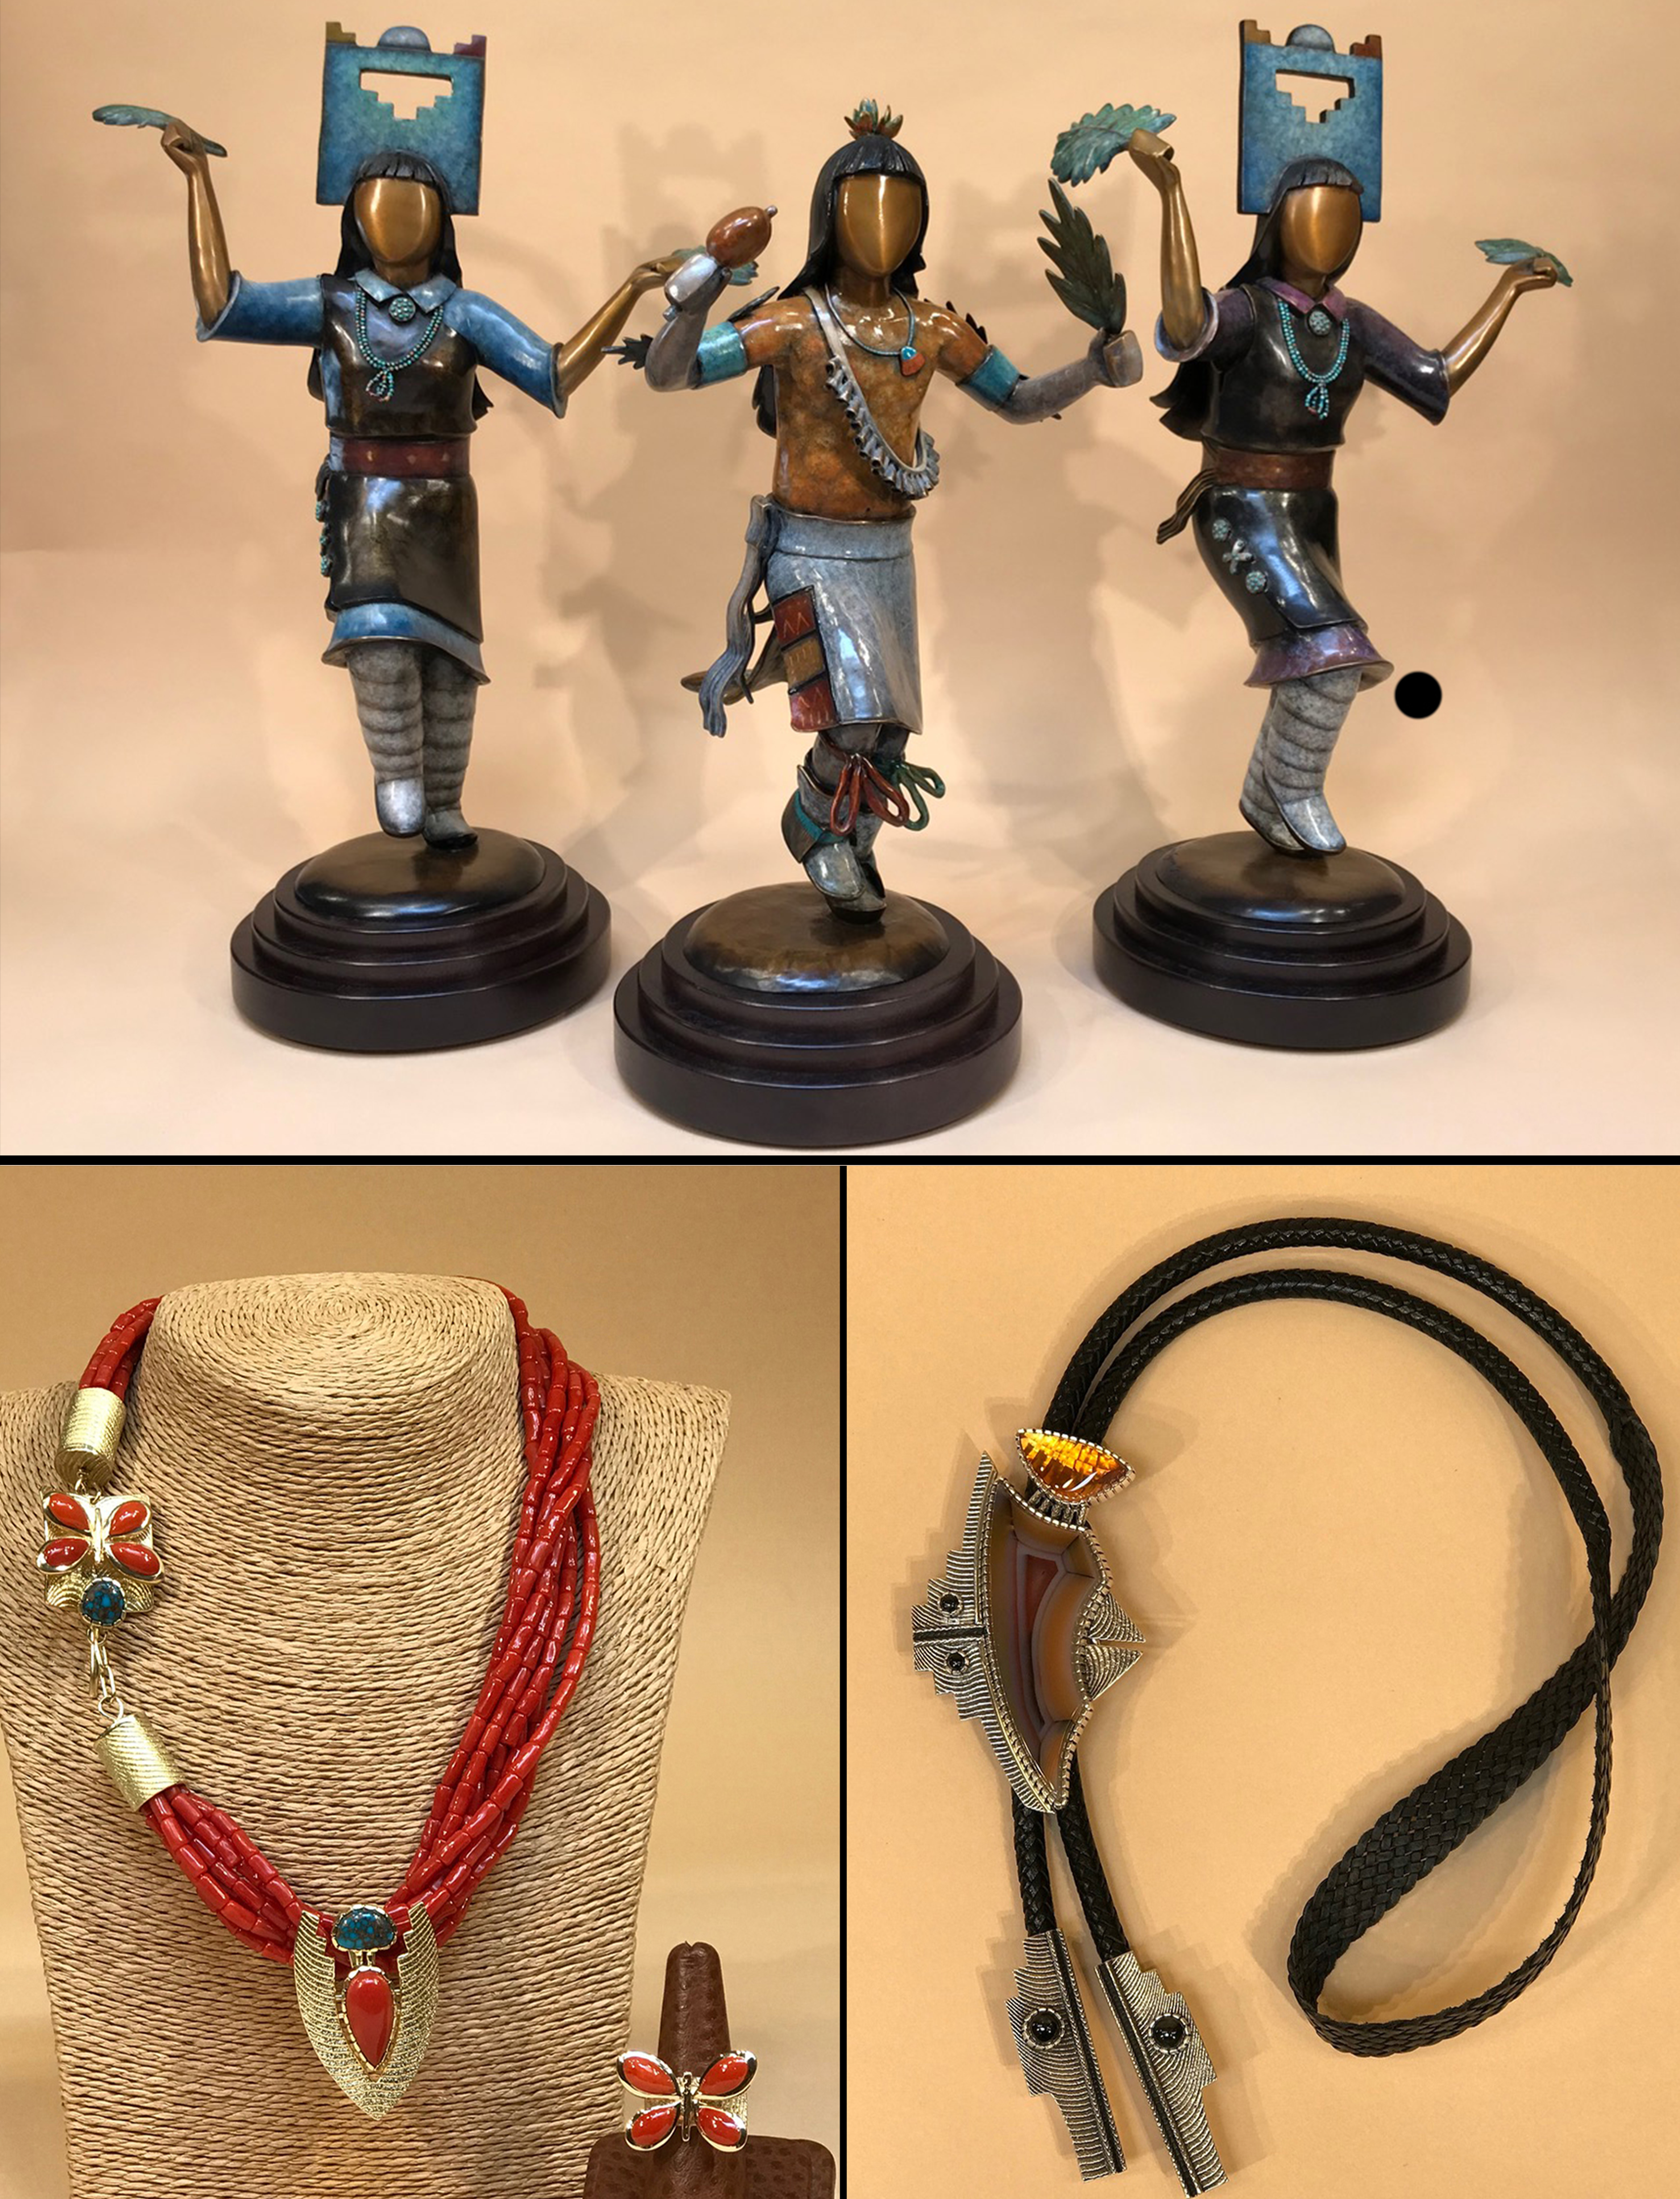 "Pueblo Corn Dancers" by Joe Cajero, Jr. / Coral Necklace, Gold Pendant, Gold Ring and Inlaid Silver Bolo Tie by Althea Cajero. © The Artists 